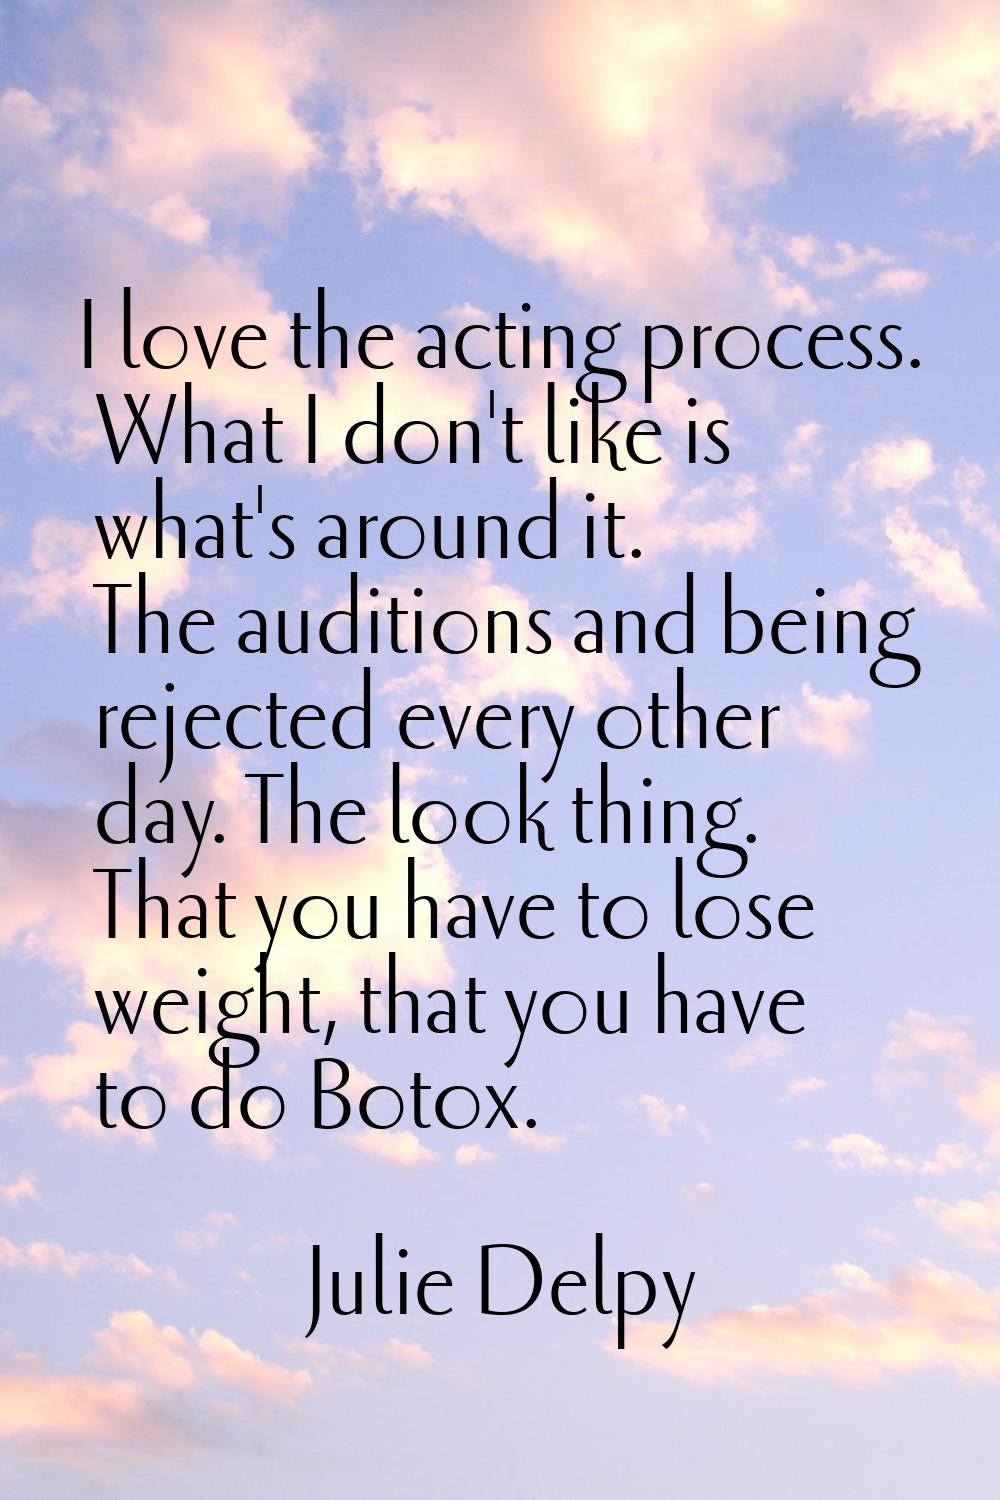 I love the acting process. What I don't like is what's around it. The auditions and being rejected 